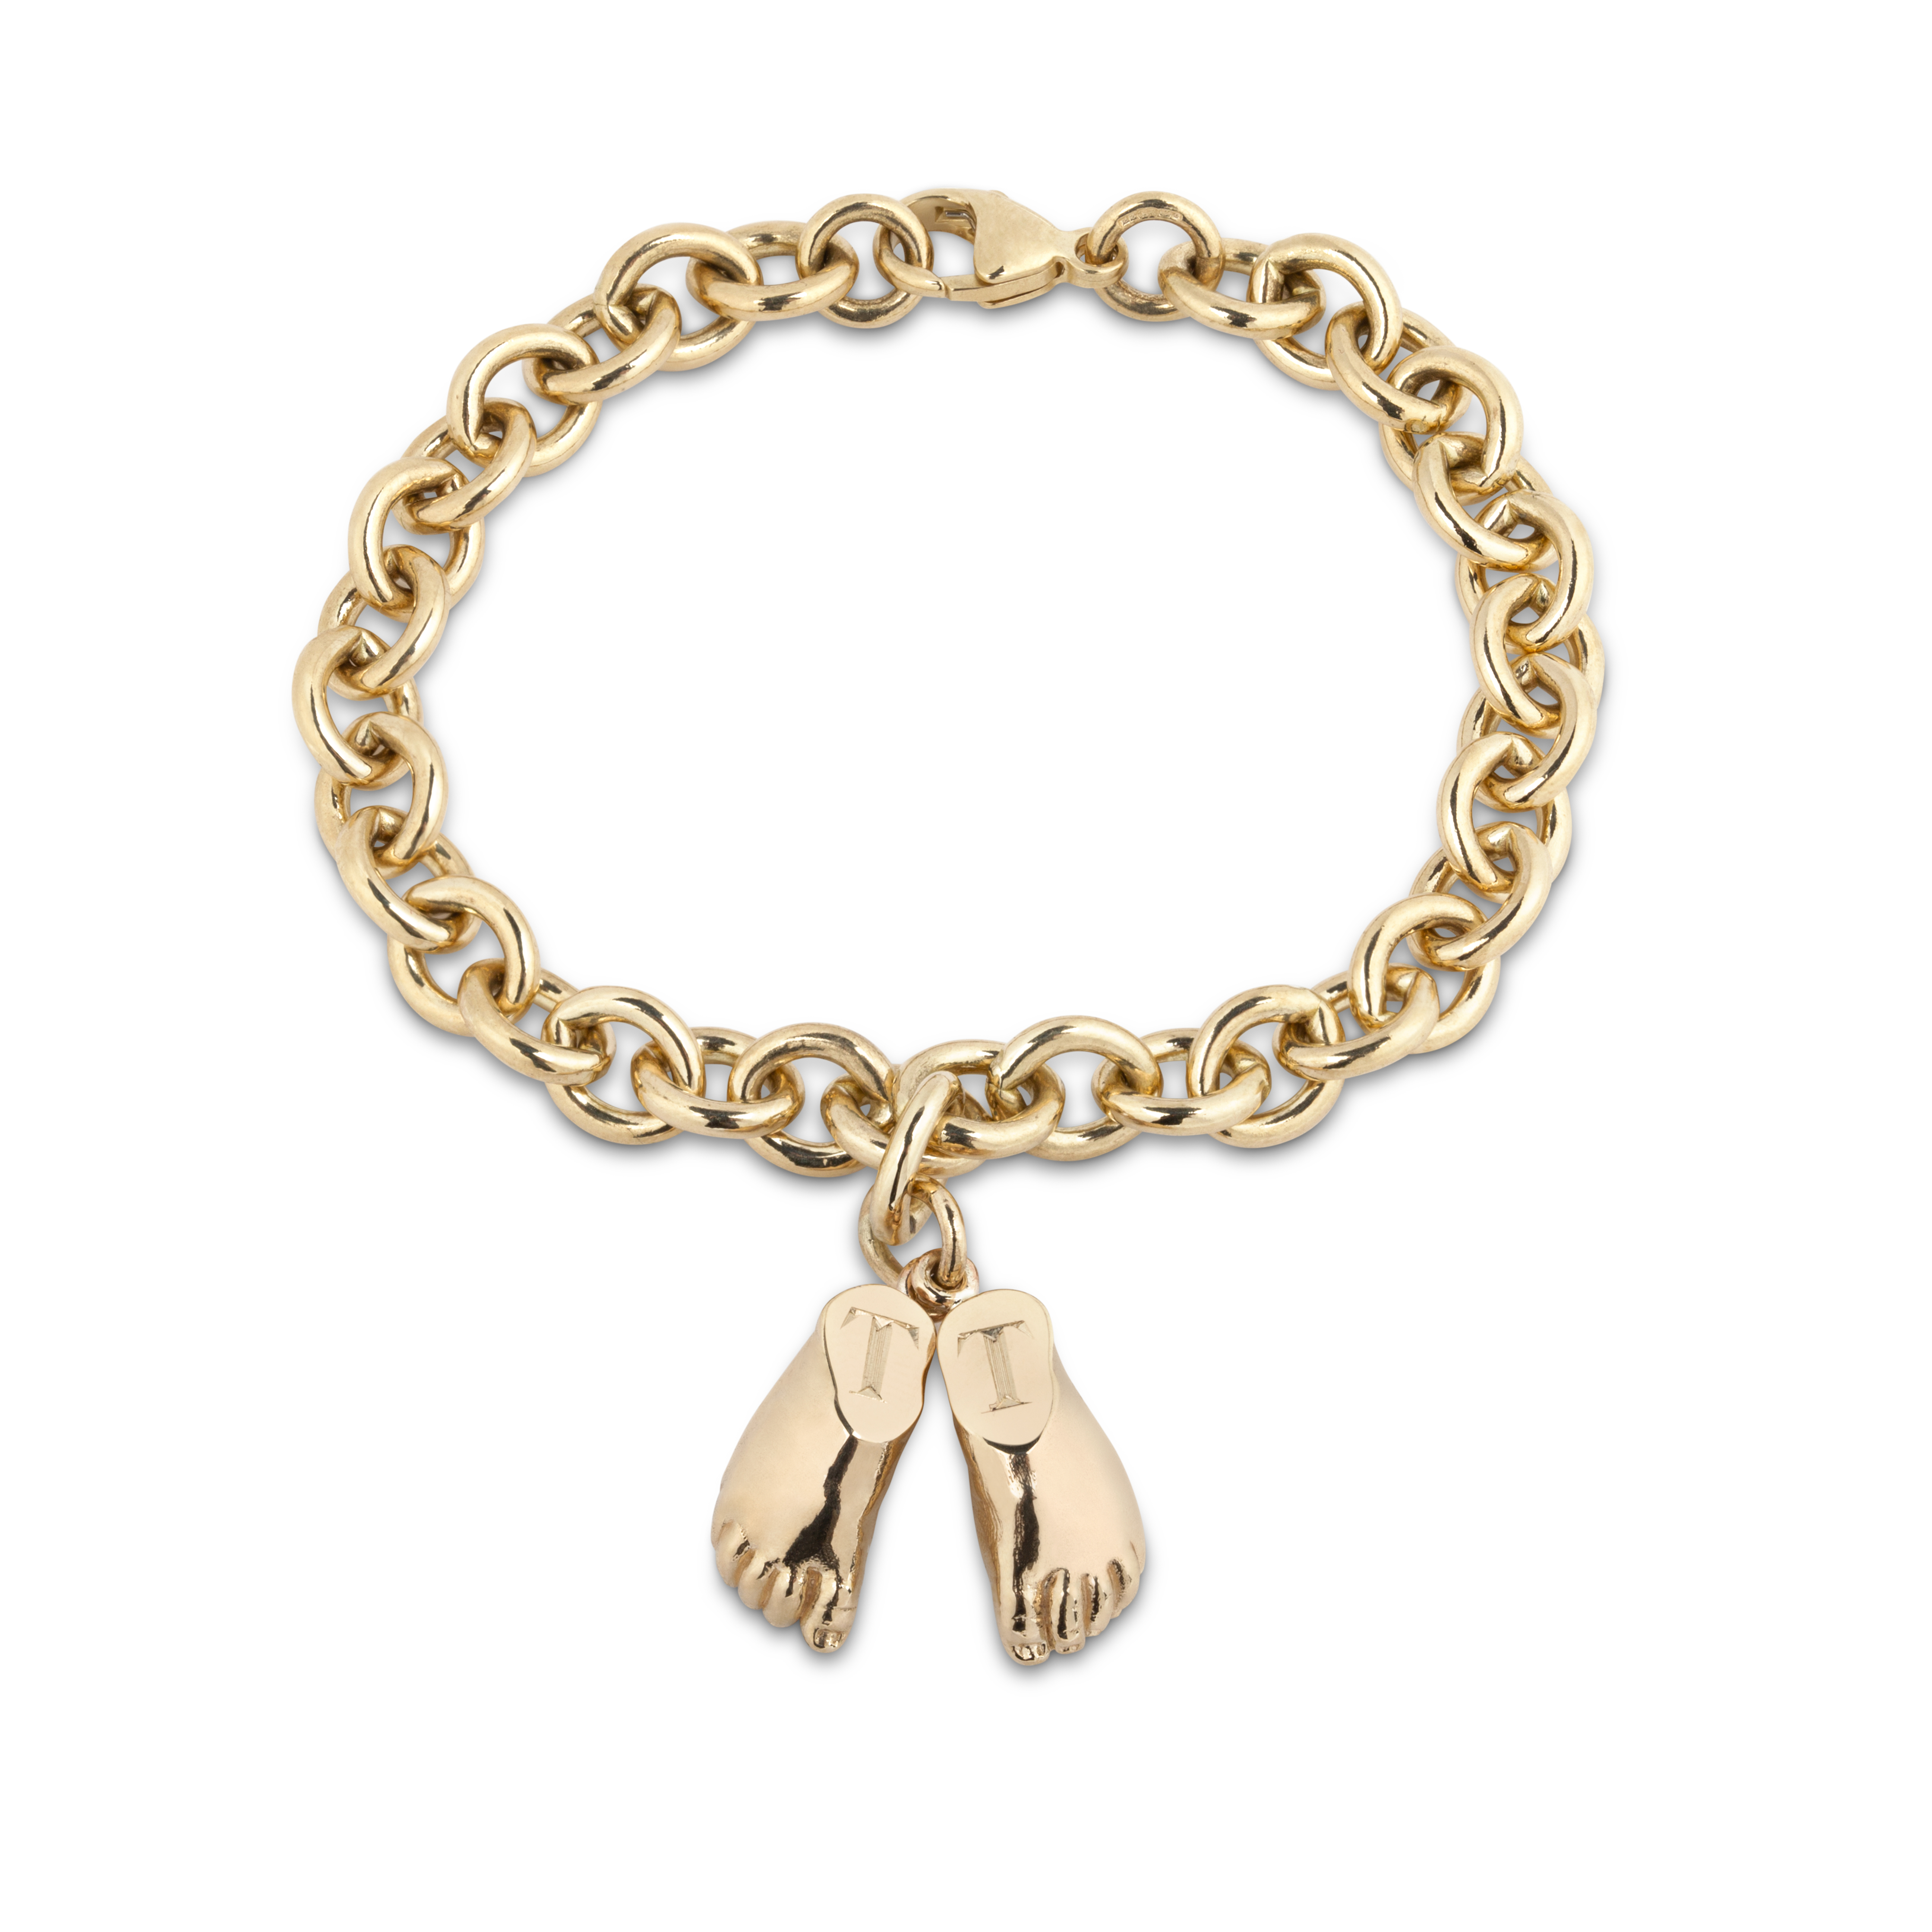 Personalised Gold Or Silver Plated Engraved Bracelet By Florence London |  notonthehighstreet.com